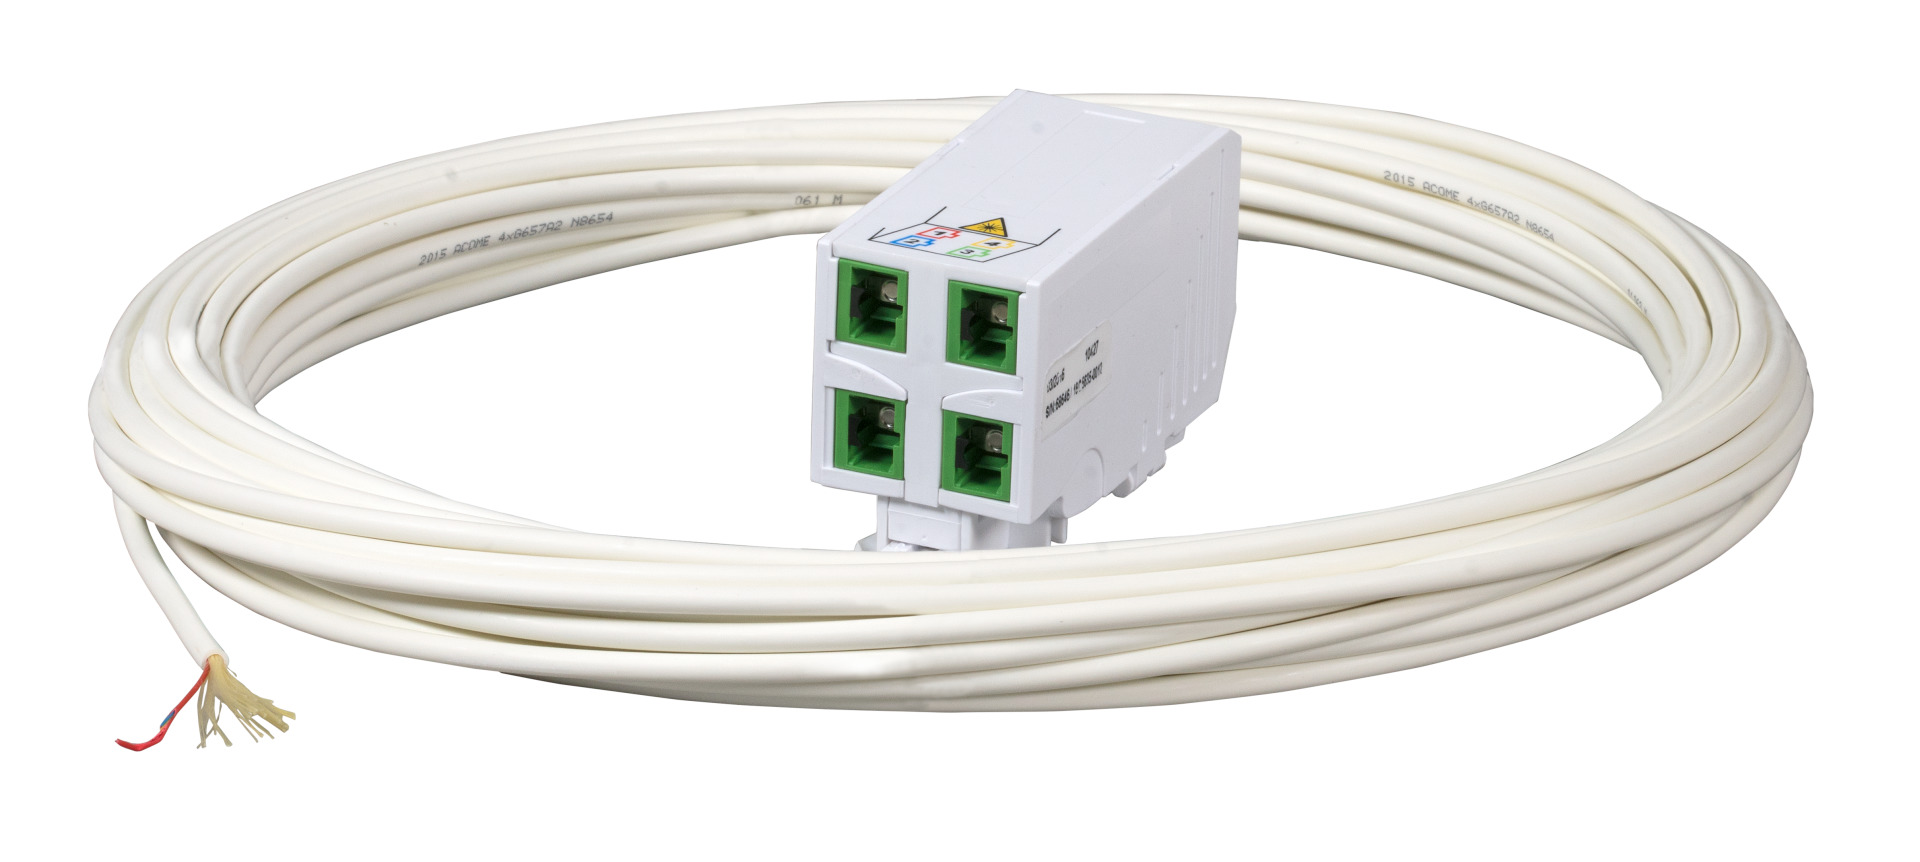 FTTH DIN RAIL Adapter,1x SC/APC adapter, Laserprotection integrated,100m DropCa